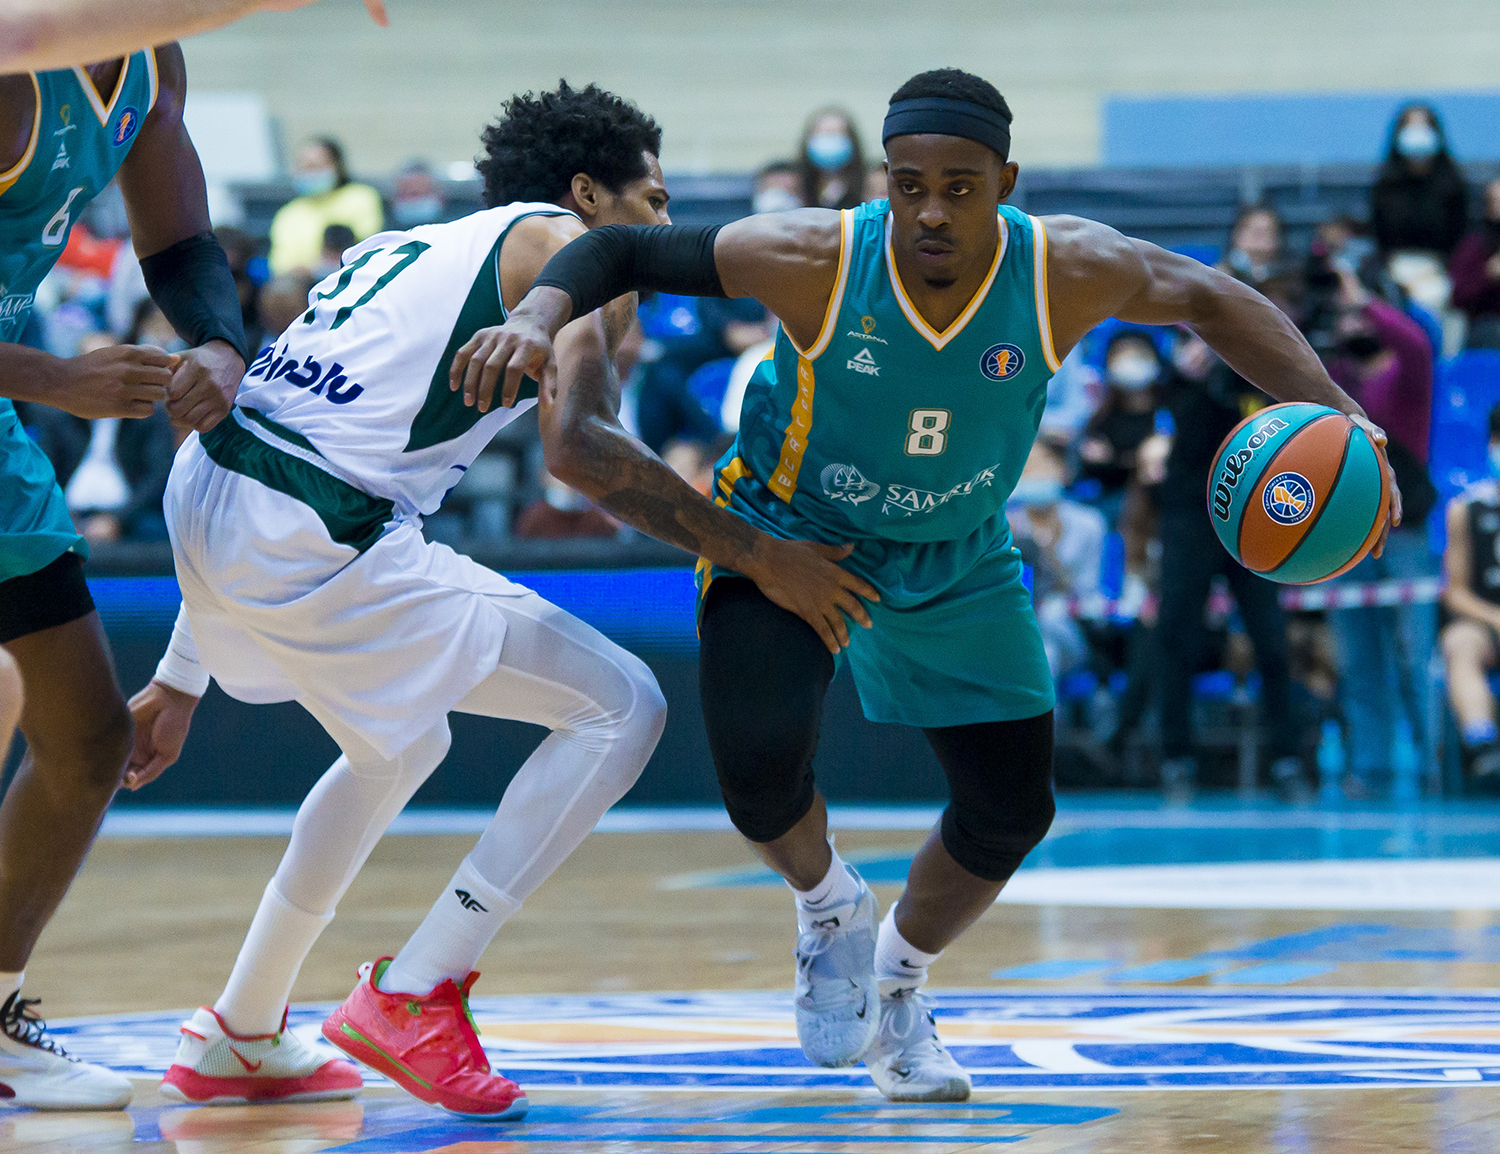 Astana repeats the biggest win over Zielona Gora in the history of the rivalries